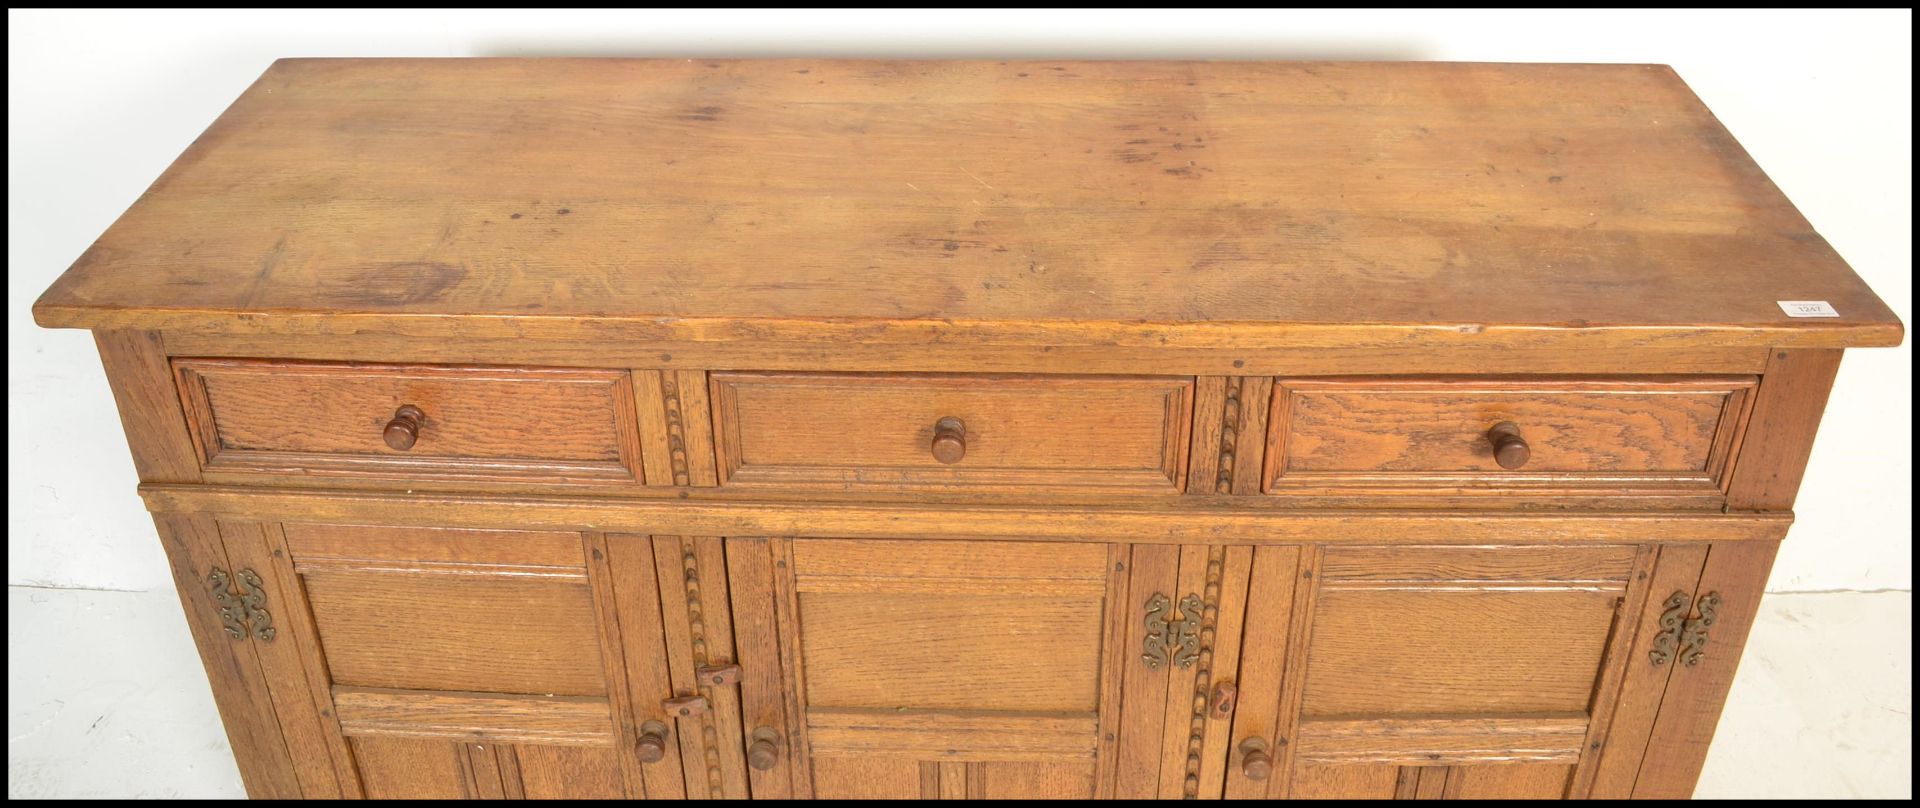 A 20th Century oak Jacobean revival sideboard credenza, flared top over a configuration of drawers - Image 6 of 6